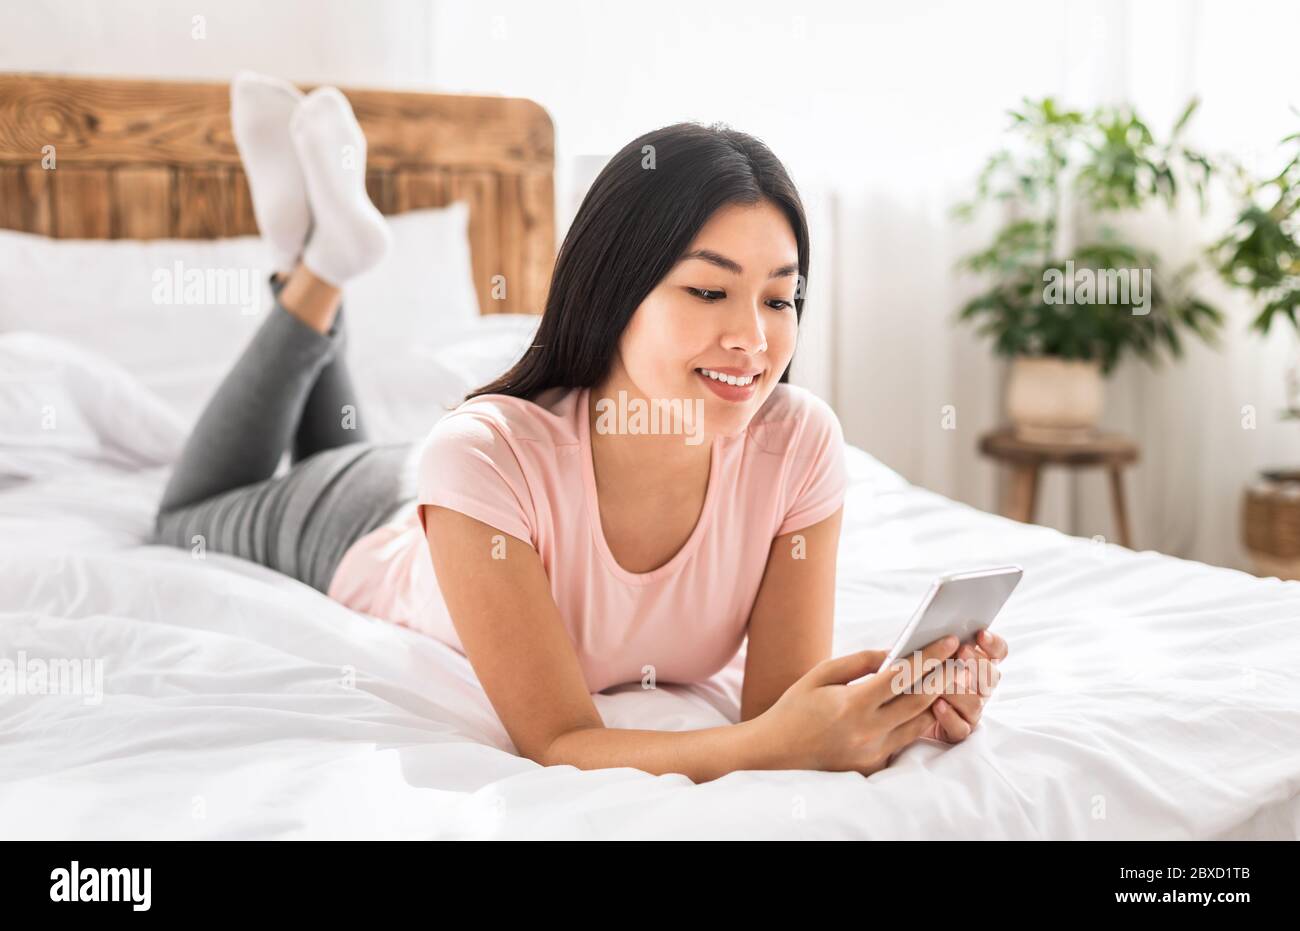 Japanese Girl Using Cellphone Texting With Friends Lying On Bed Stock Photo